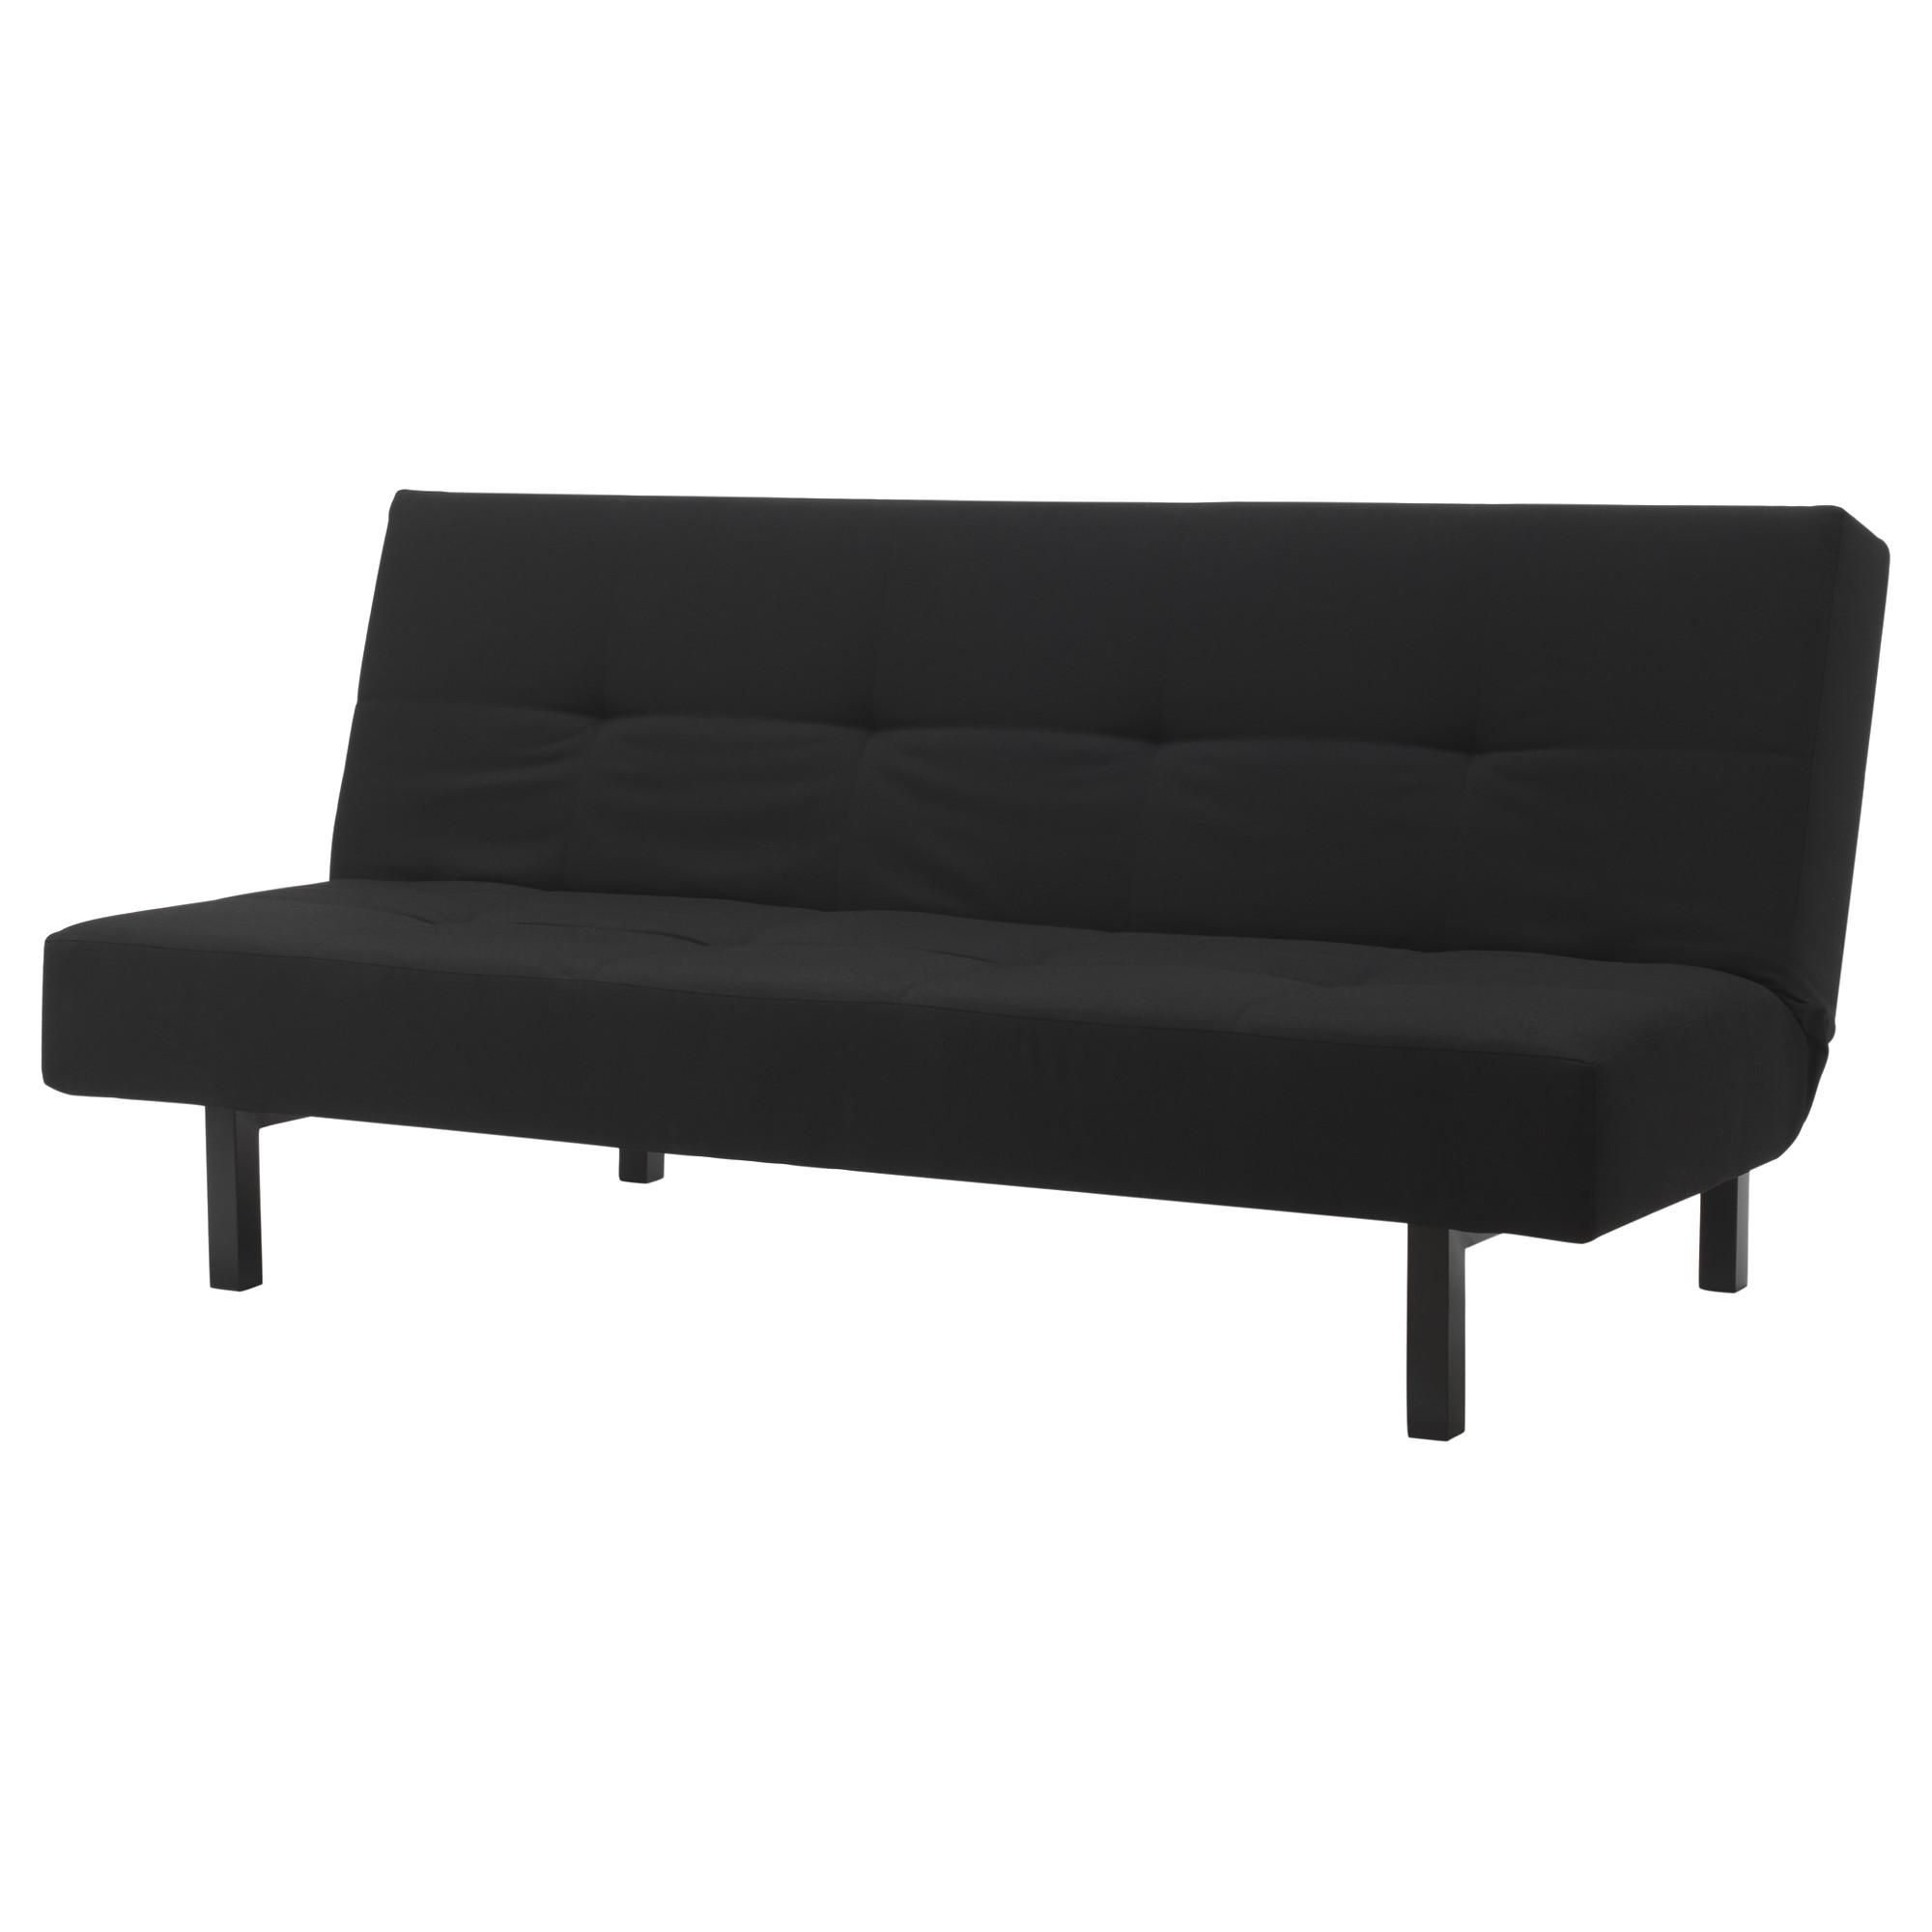 Sofa Beds & Futons – Ikea With Sofa Beds (View 2 of 20)